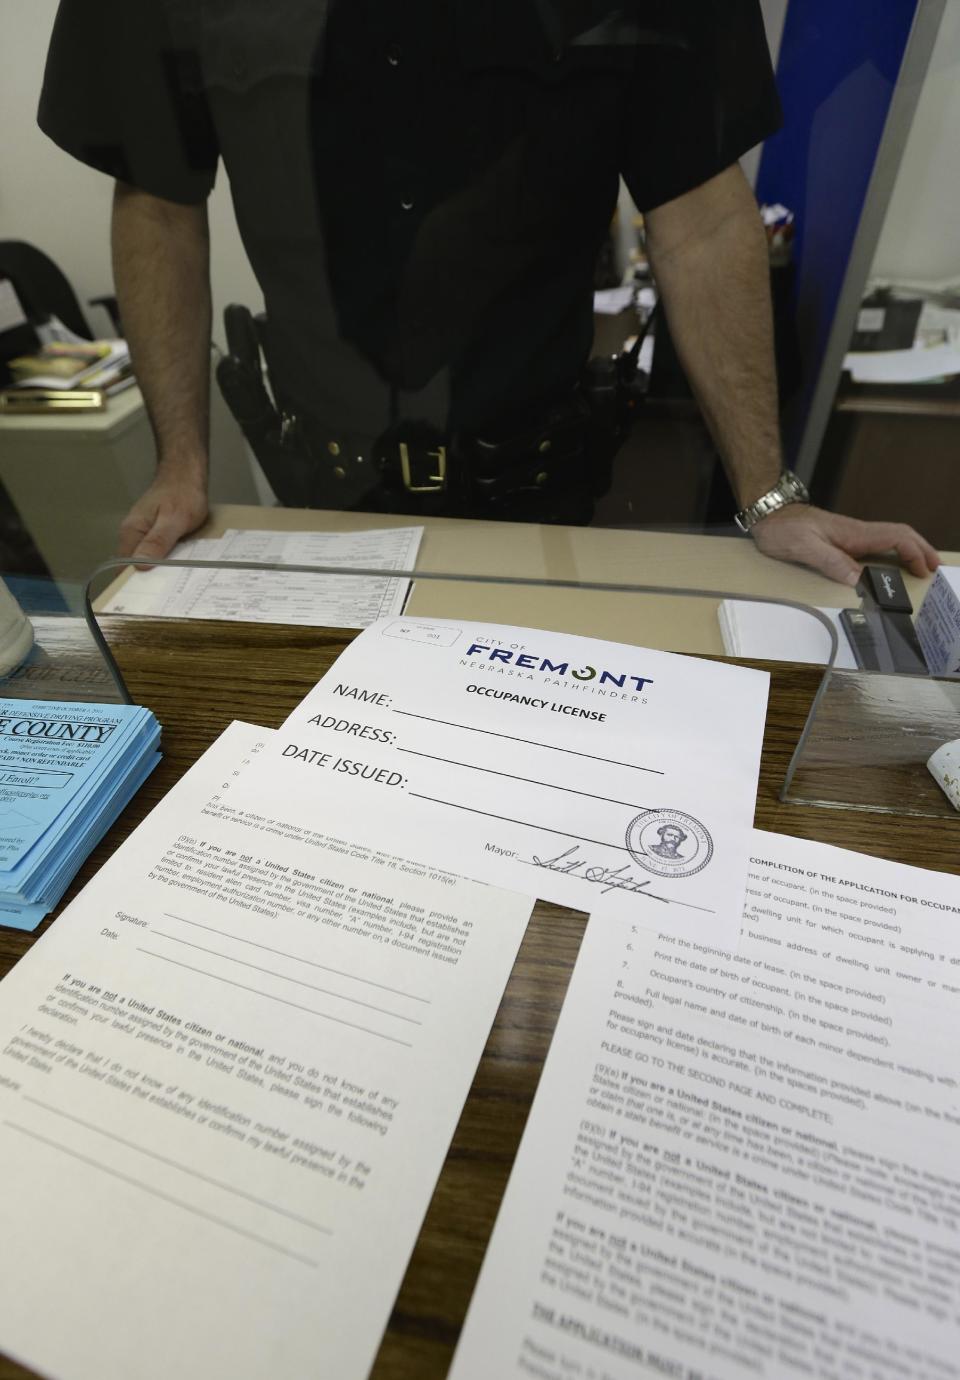 Application forms and an occupancy license certificate are seen at the police station in Fremont, Neb., Wednesday, April 9, 2014, where these licenses will be issued beginning Thursday as part of the city's ordinance aimed at combating illegal immigration. (AP Photo/Nati Harnik)